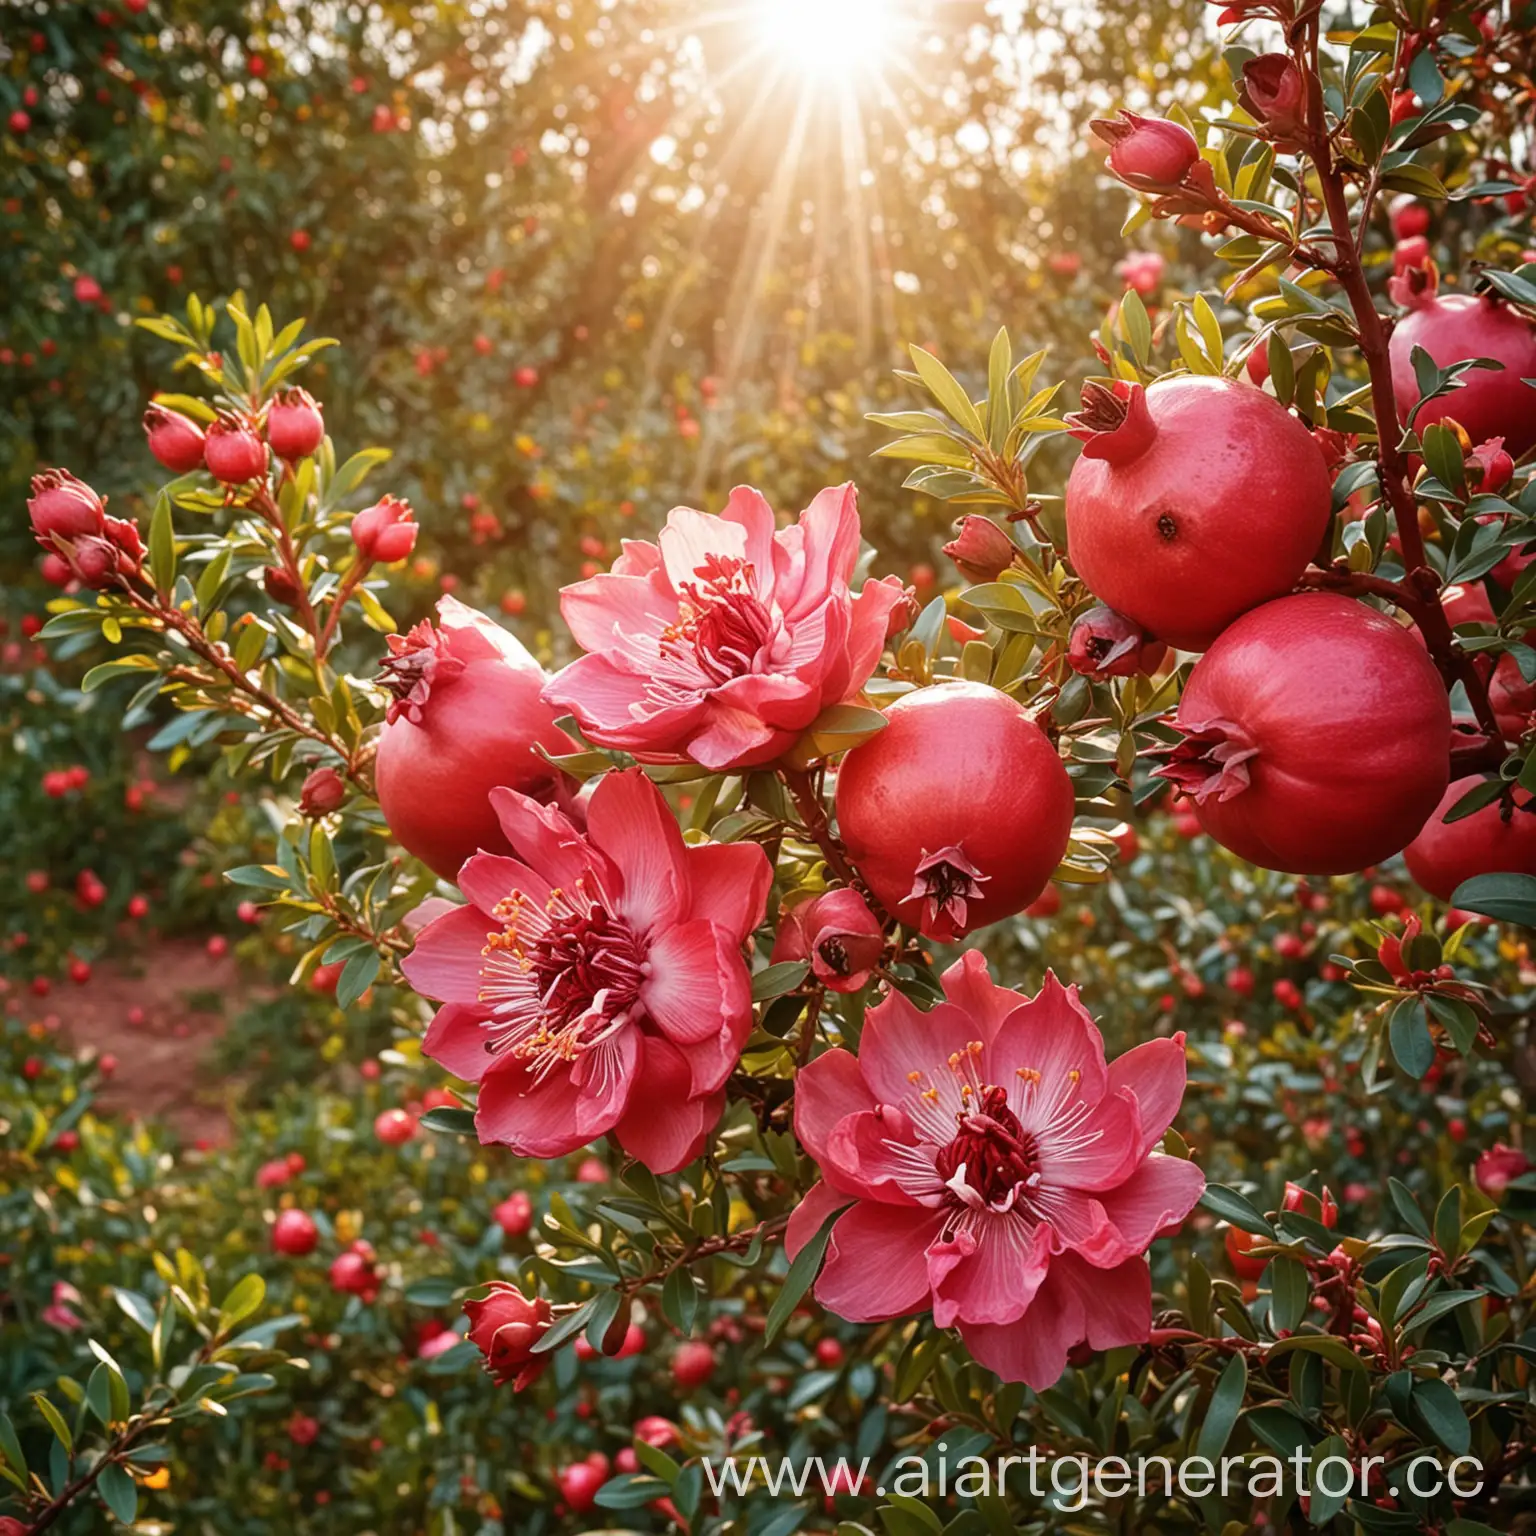 Background pomegranate garden pomegranate flowers pink and red beautiful light from the sun shine